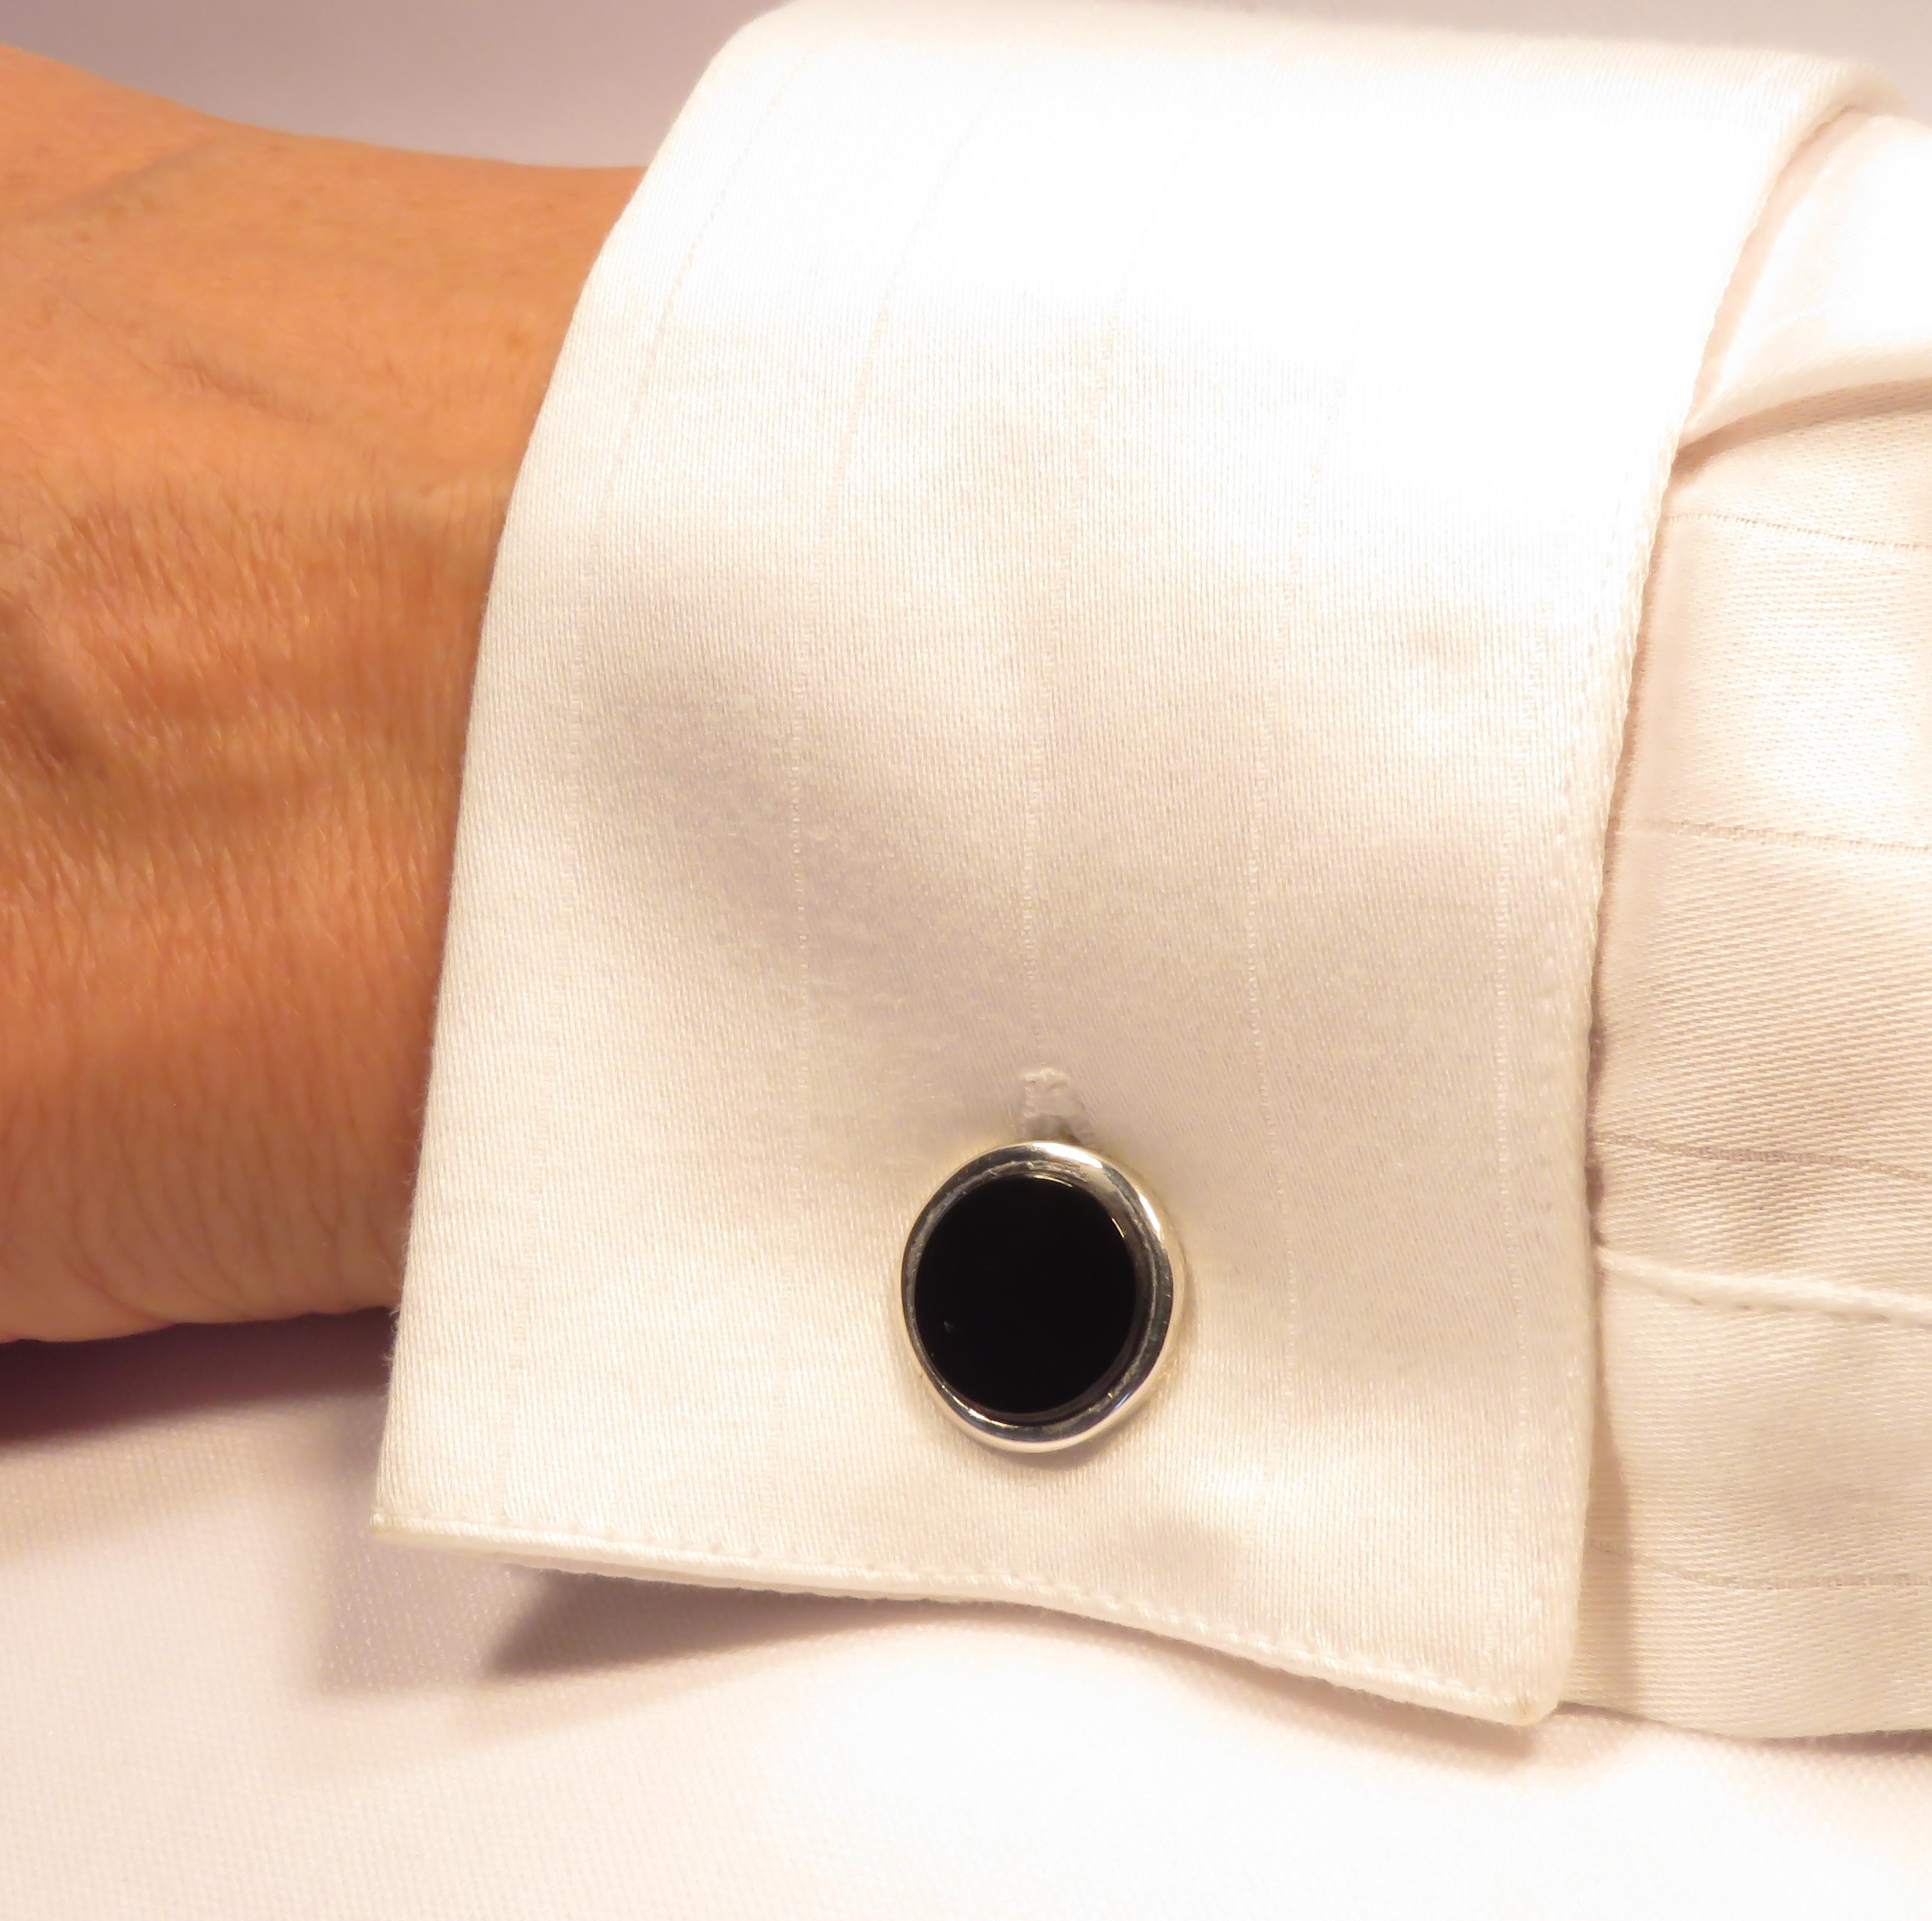 Elegant cufflinks crafted in sterling silver with two natural onyx circles and bullet back toggle. The onyx dimension is: 12 mm / 0.472 inches. Marked with the Italian silver mark 925 and Botta Gioielli brandmark 716MI. 

Handcrafted in: 925